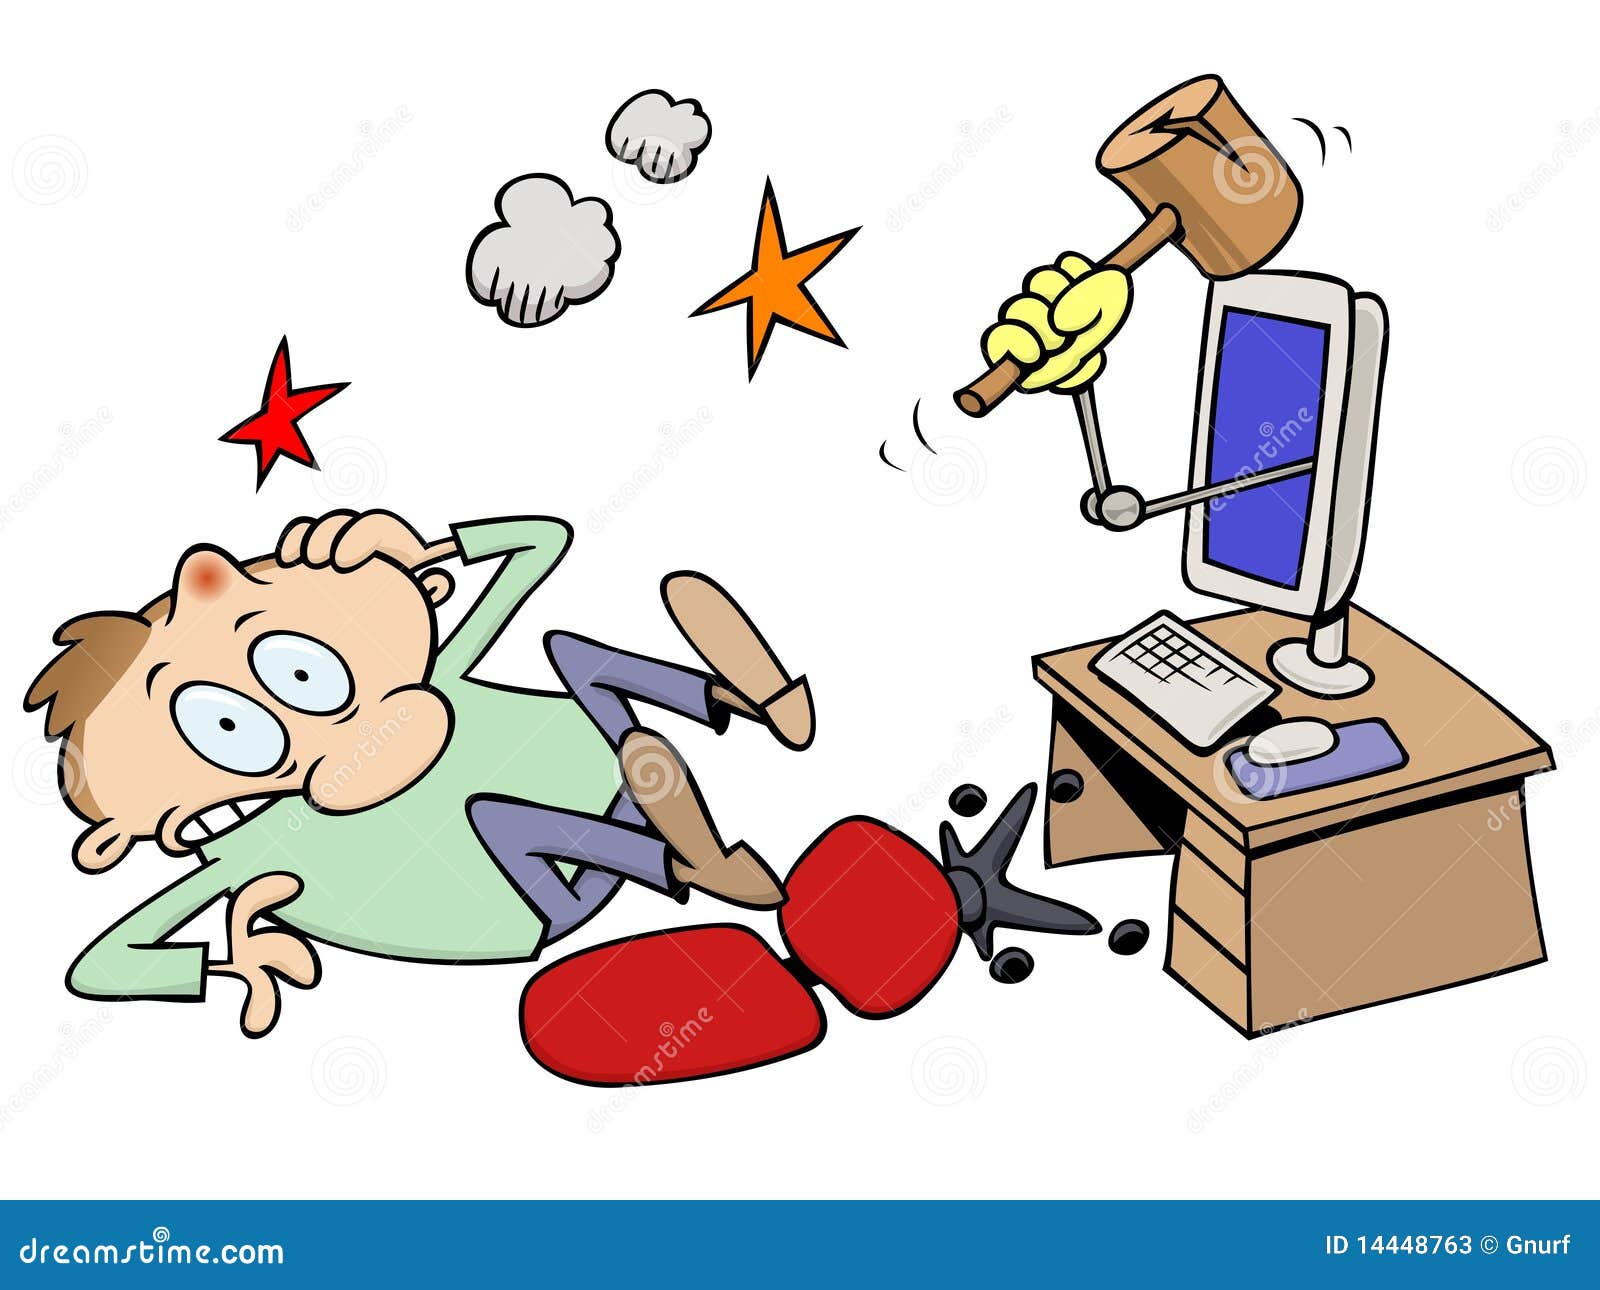 computer guy clipart - photo #37